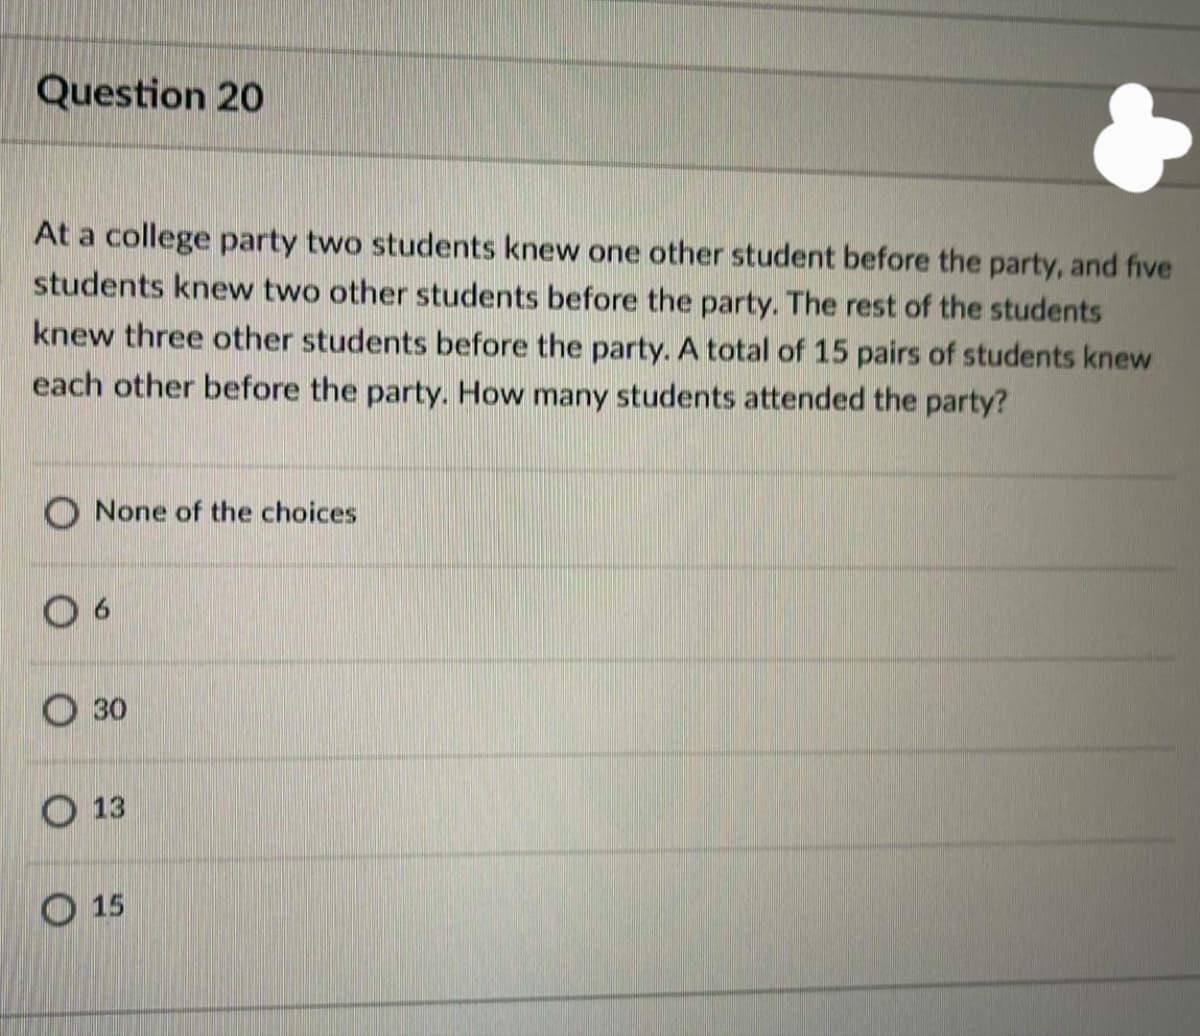 Question 20
At a college party two students knew one other student before the party, and five
students knew two other students before the party. The rest of the students
knew three other students before the party. A total of 15 pairs of students knew
each other before the party. How many students attended the party?
O None of the choices
О зо
O 13
О 15
